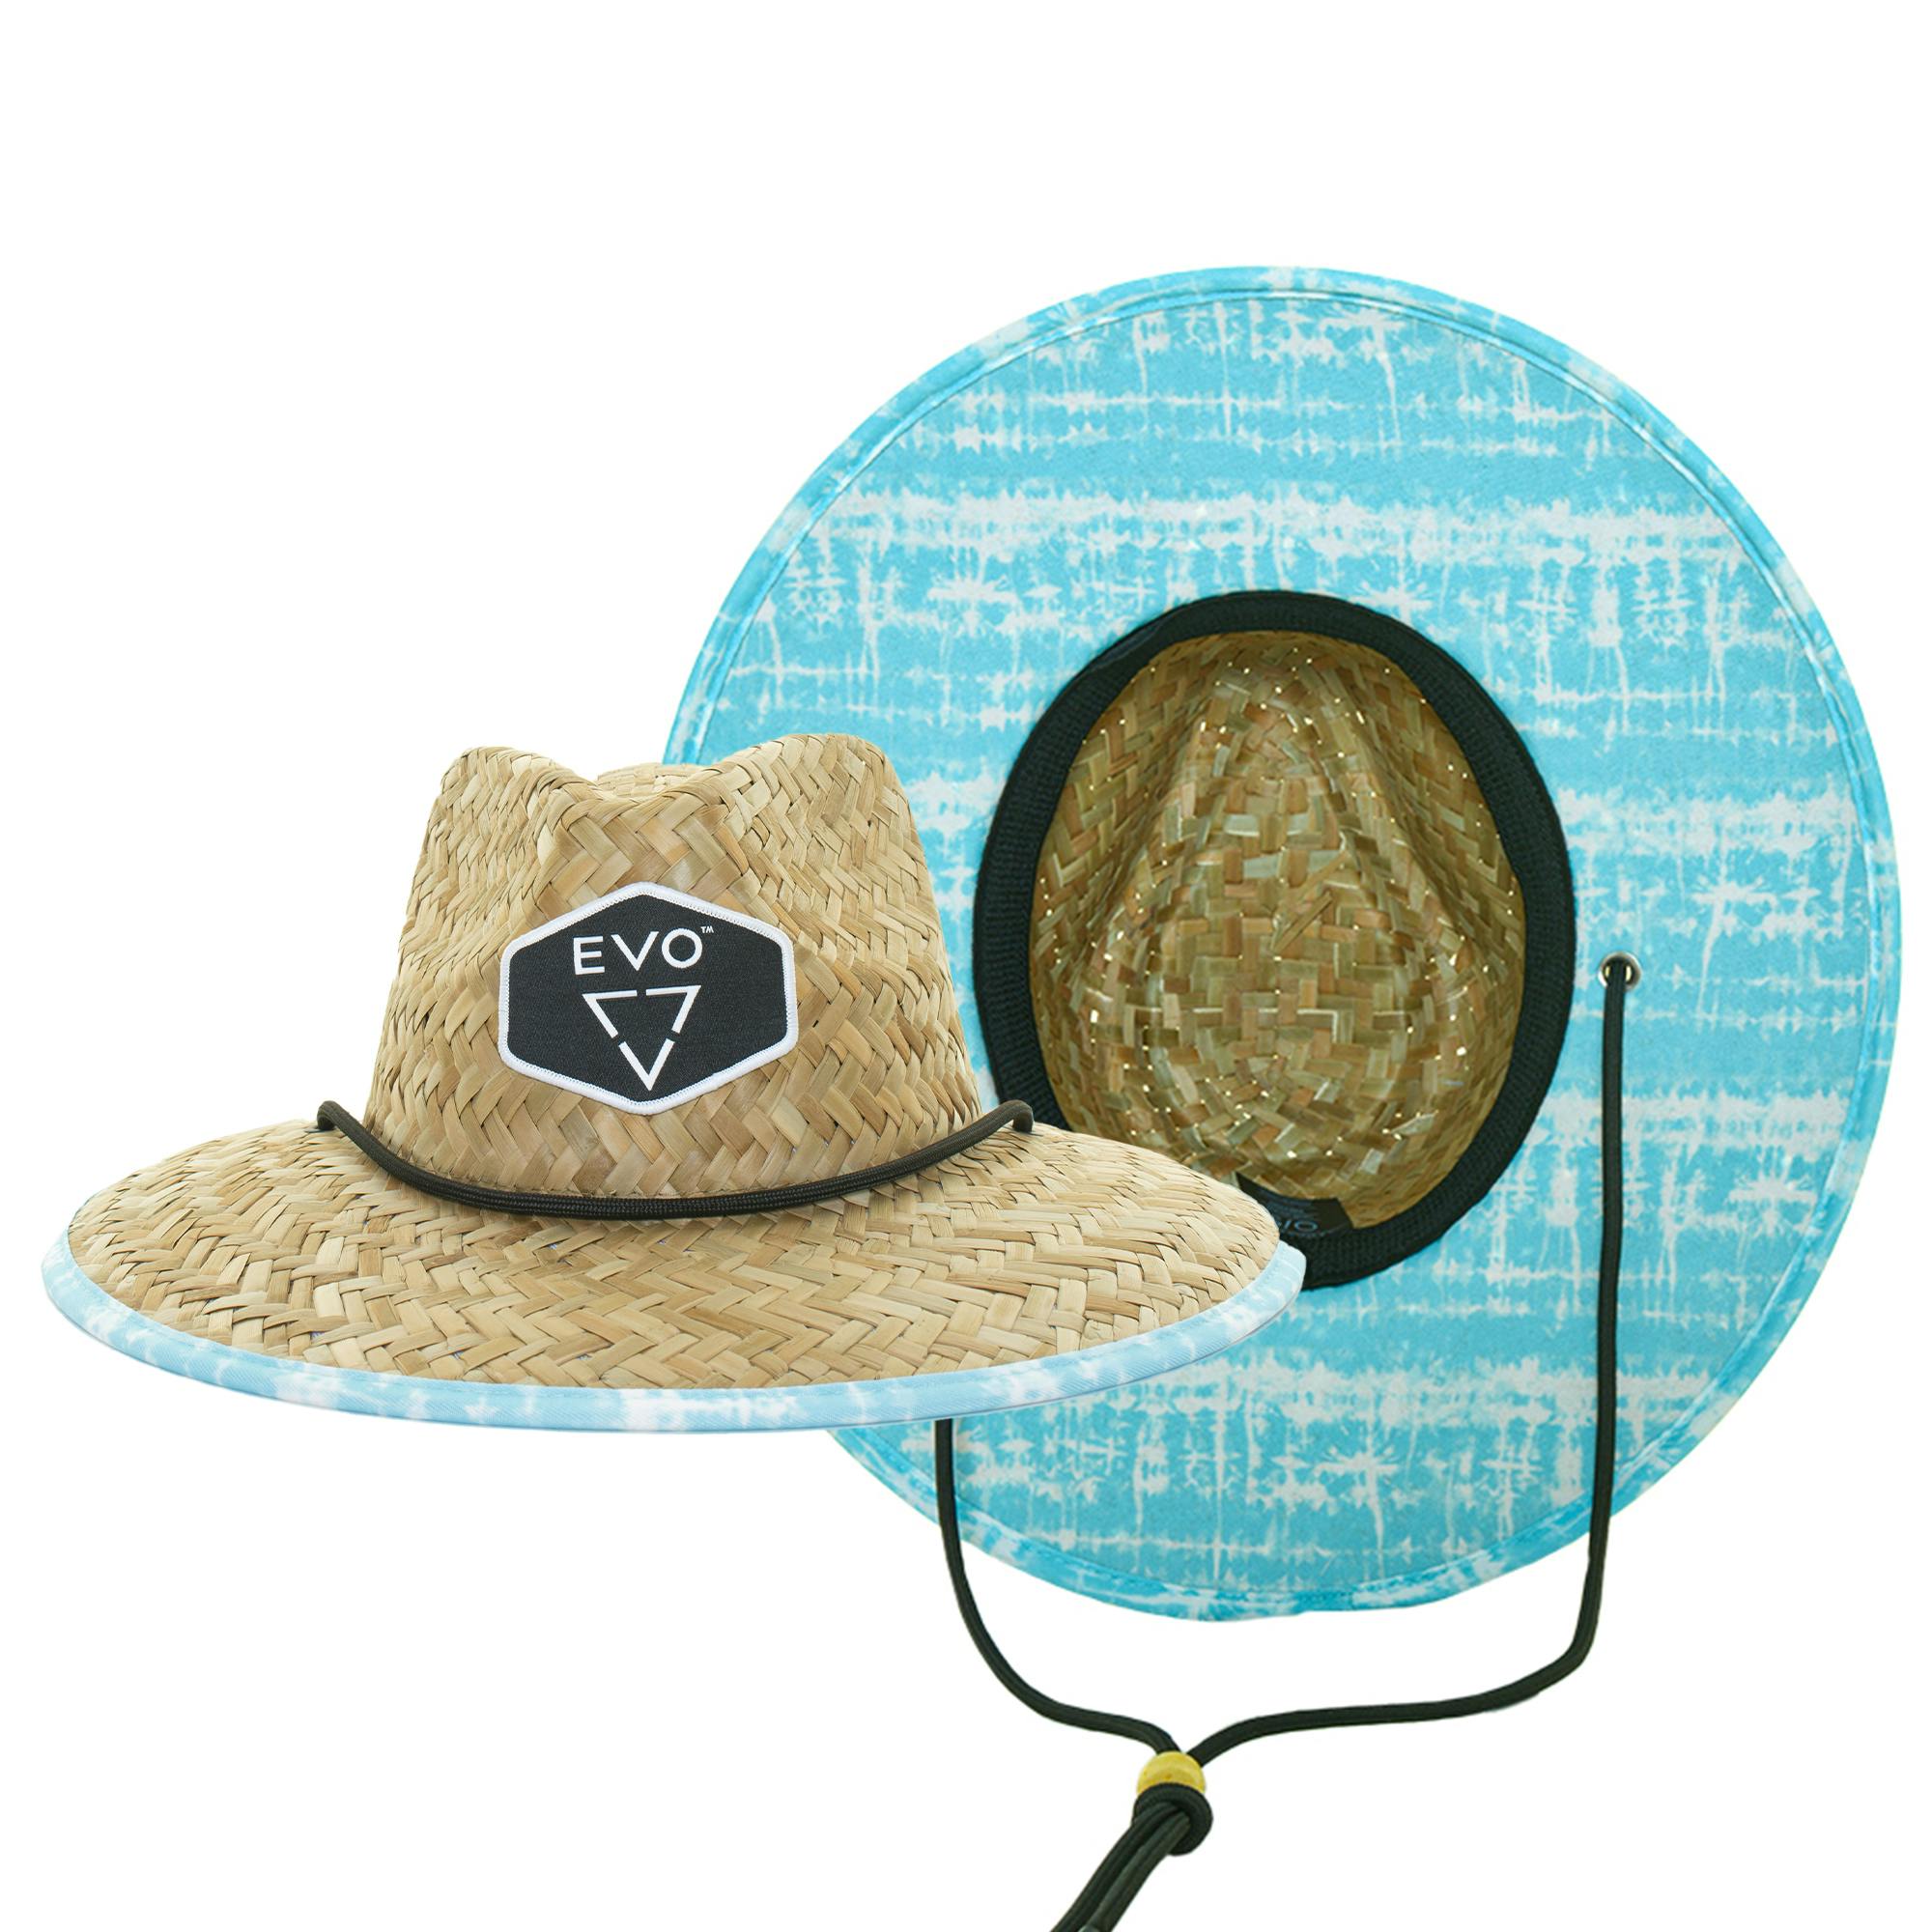 EVO Straw Lifeguard Hat - Rize Light Blue - Keys (Women's) Front and Bottom View